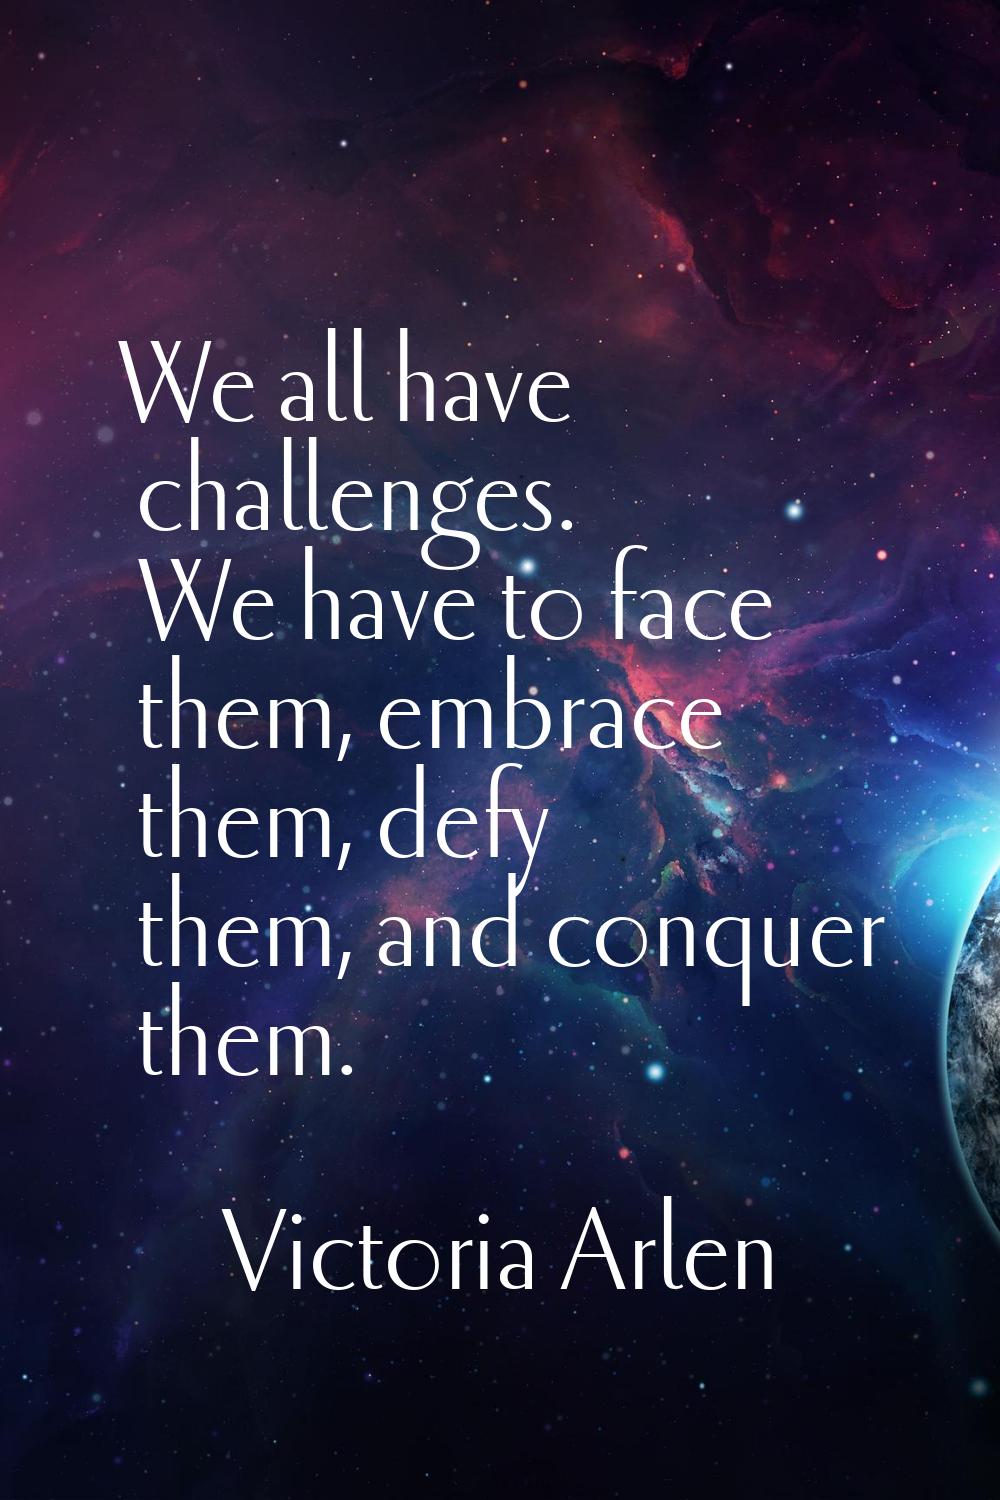 We all have challenges. We have to face them, embrace them, defy them, and conquer them.